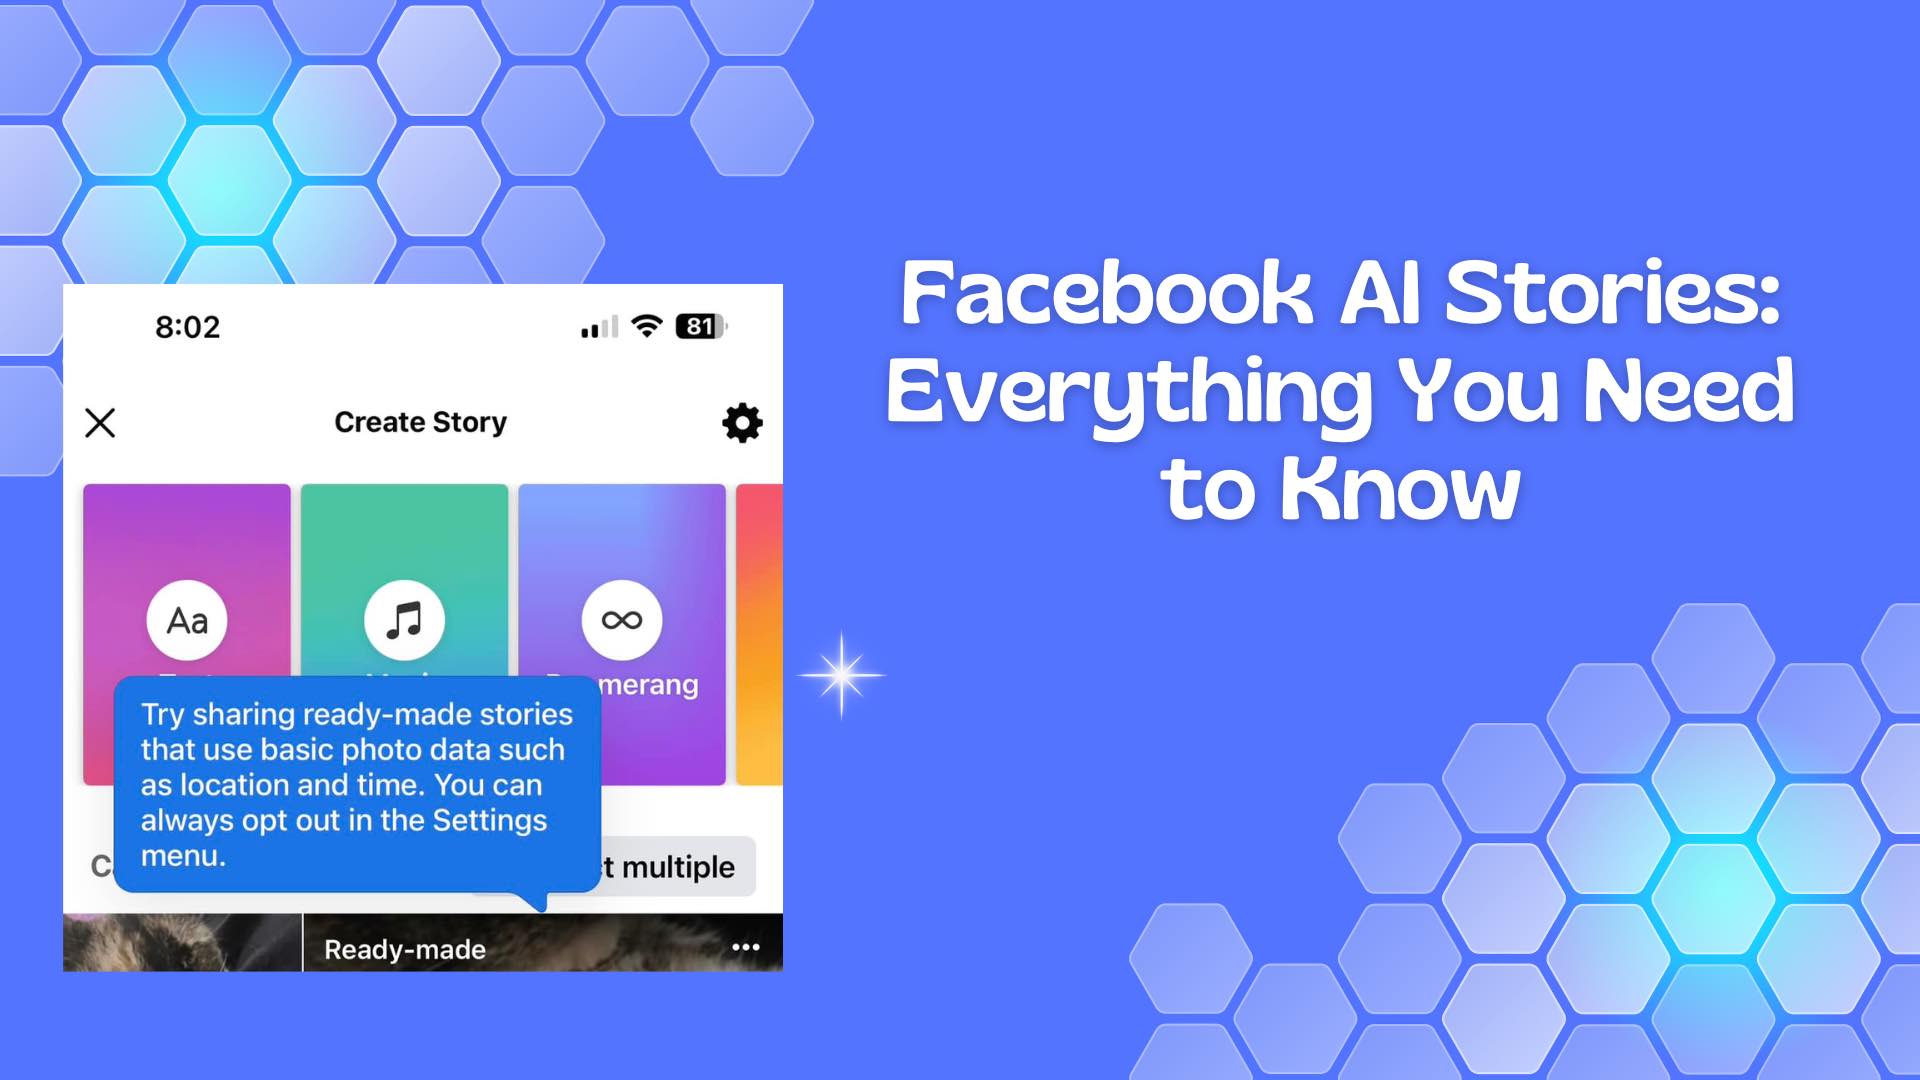 Facebook AI Stories: Everything You Need to Know